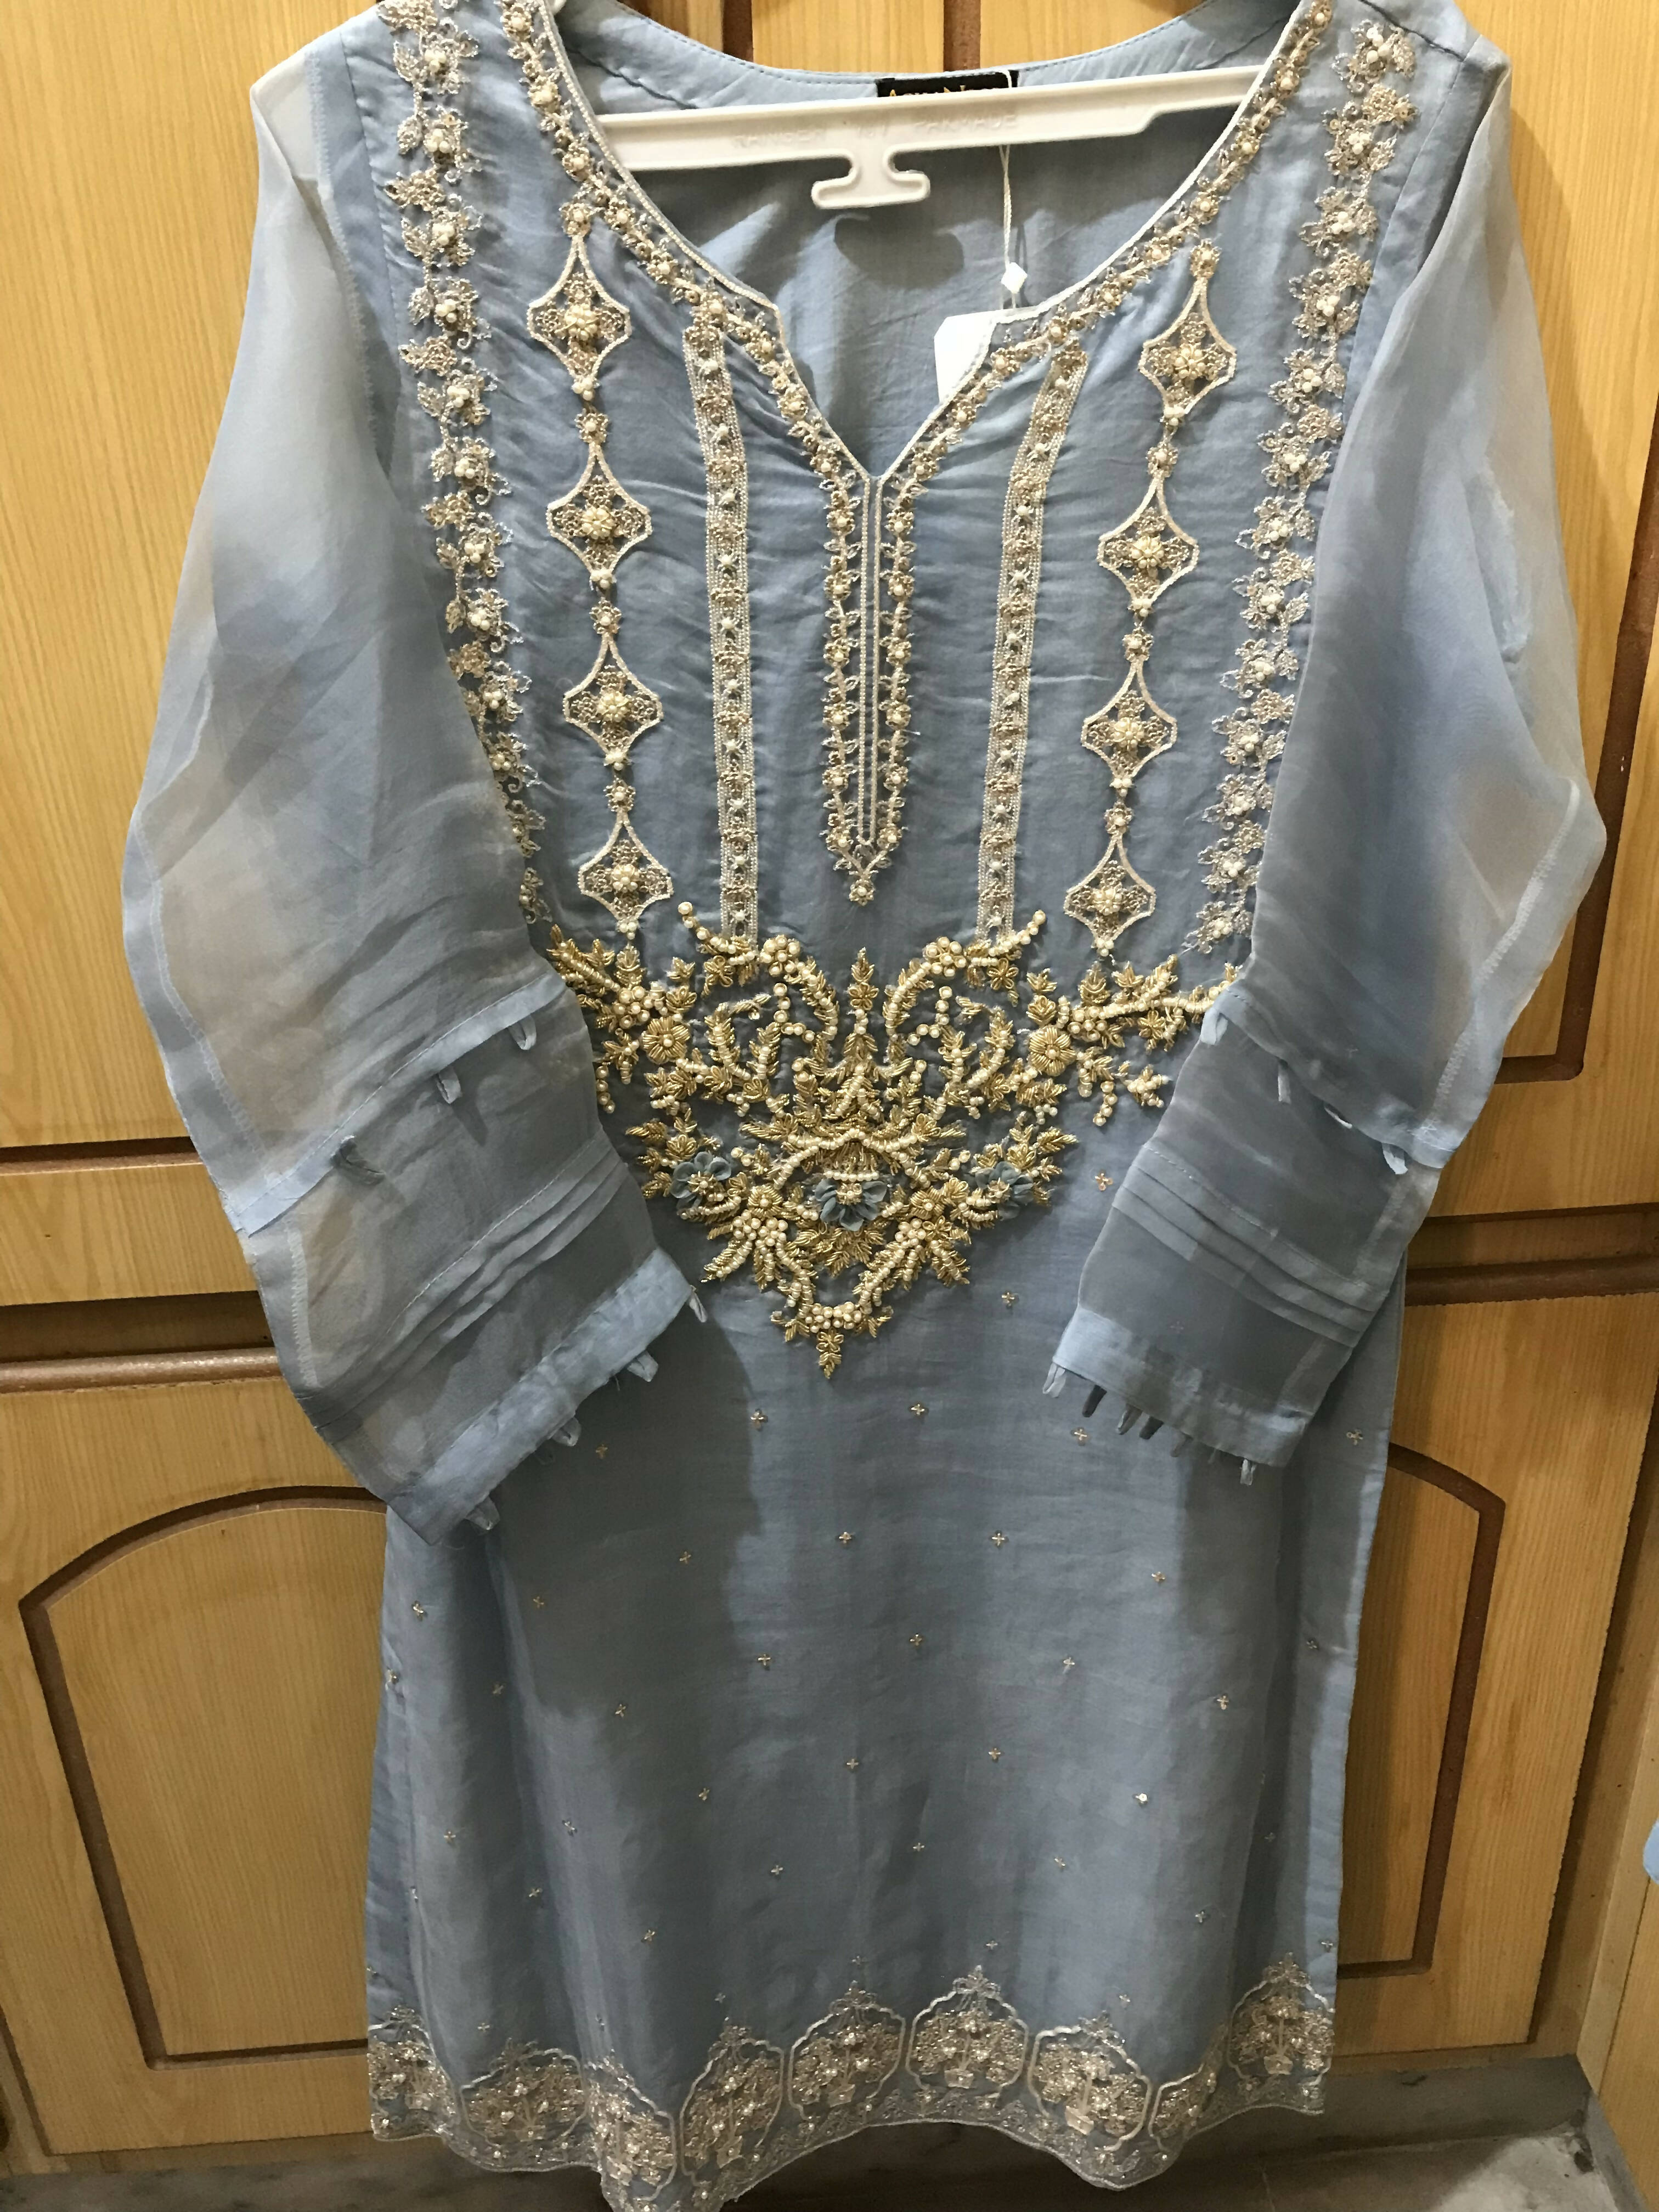 Agha noor| Formals Embroidered Dress (Size: S )| Women Formals | Brand New With Tags